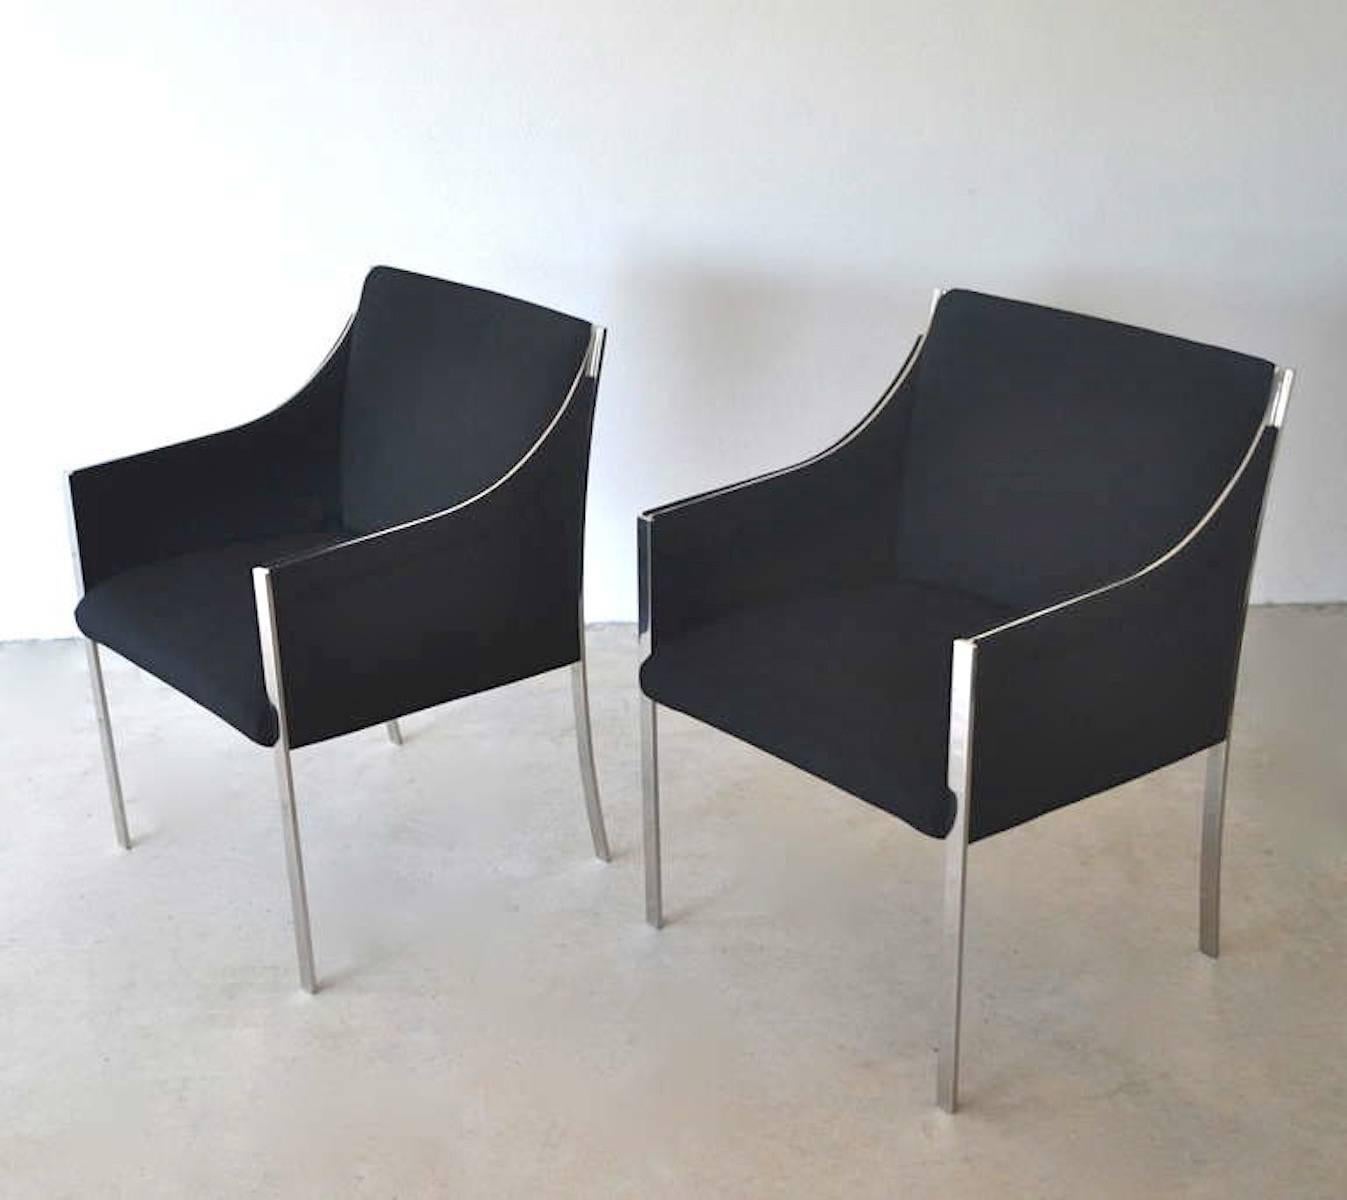 Pair of midcentury occasional chairs or lounge chairs by Jens Risom, circa 1960s. These sculptural armchairs/side chairs are upholstered in a black woven linen/wool fabric and accented with sleek chrome frames.
 